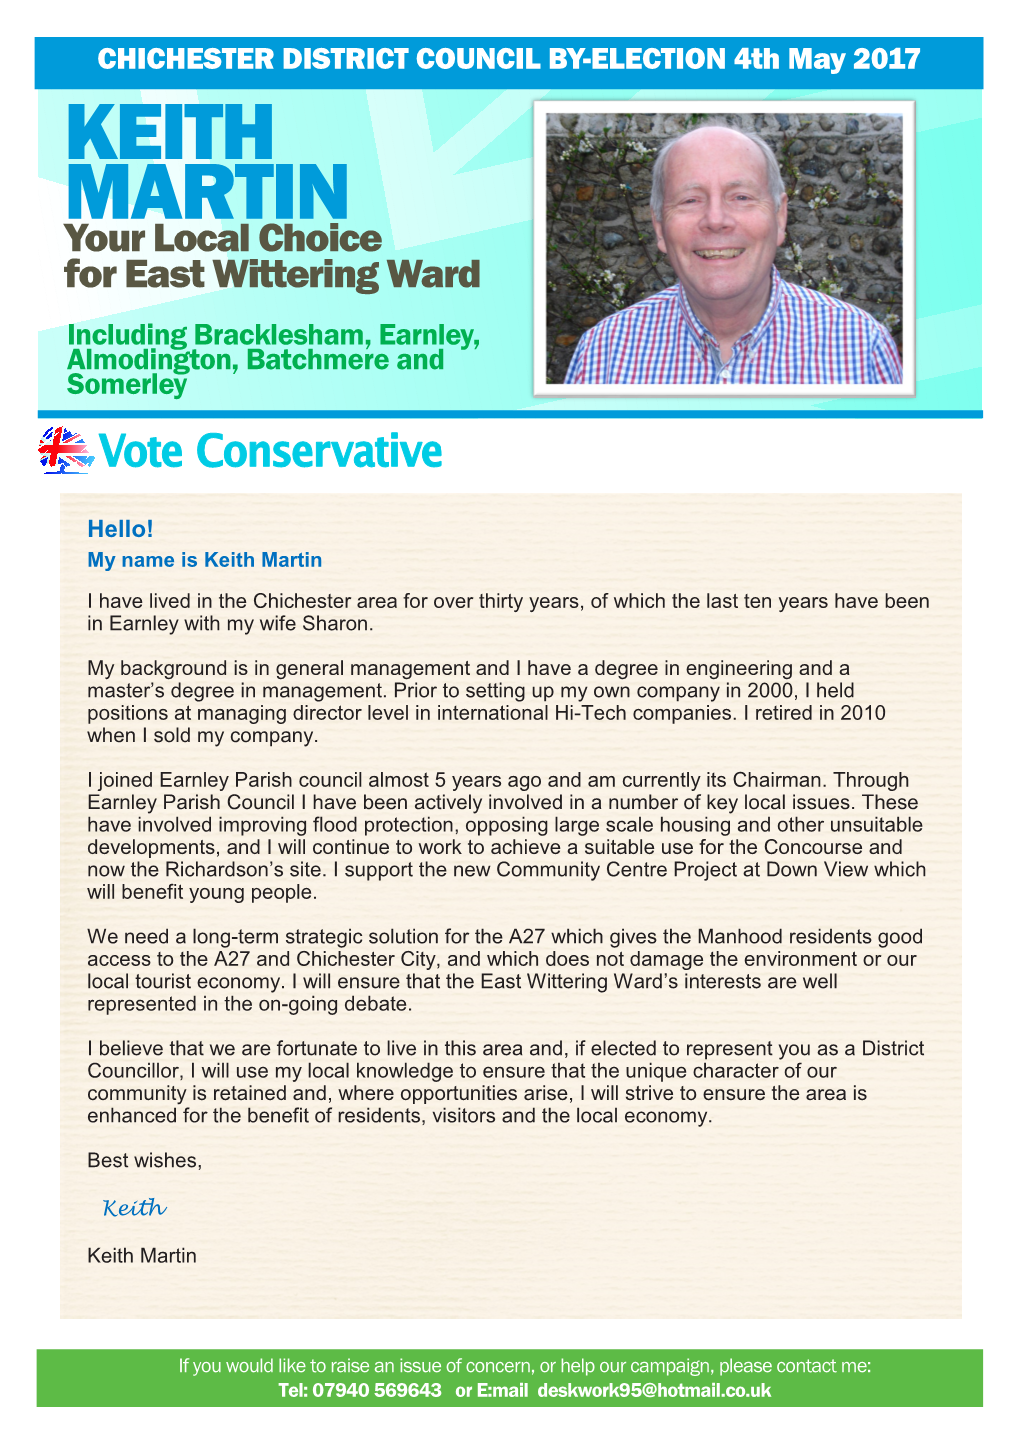 KEITH MARTIN Your Local Choice for East Wittering Ward